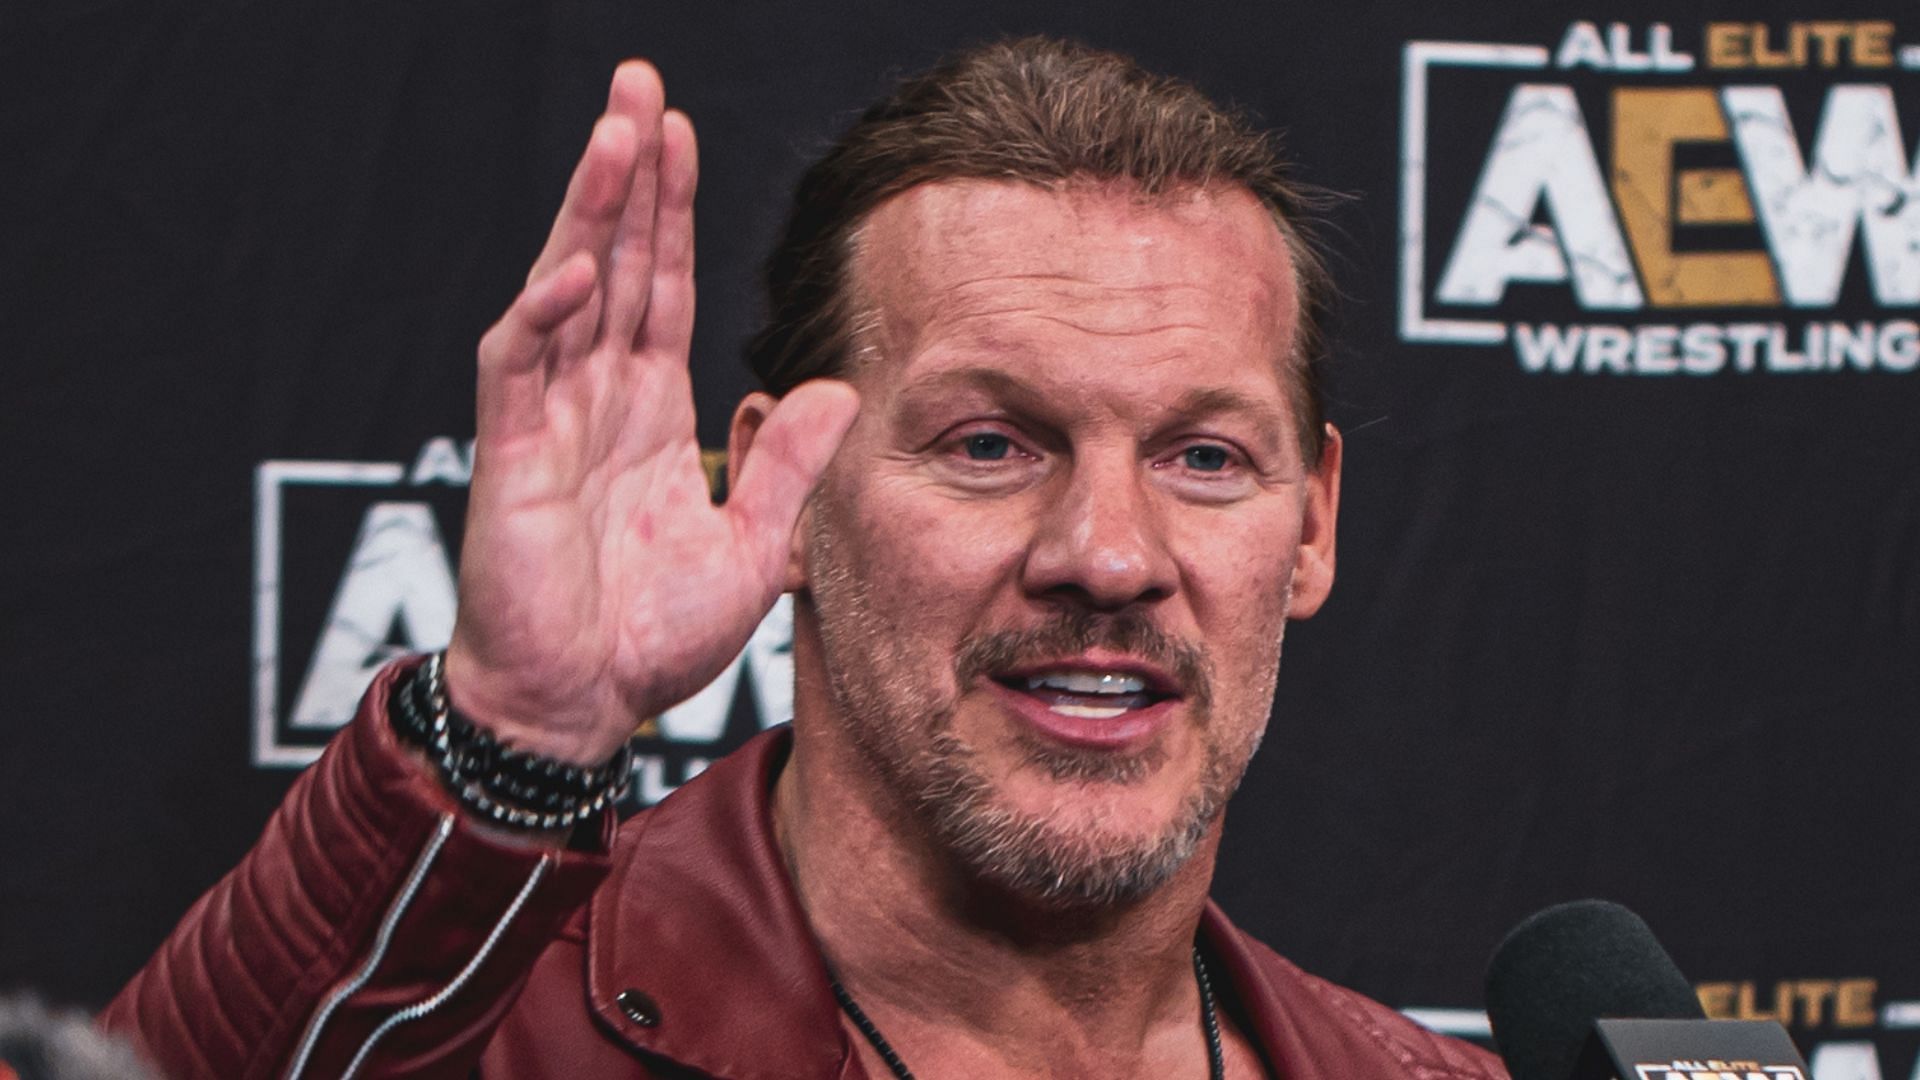 Chris Jericho at the AEW Double or Nothing 2022 press conference (credit: Jay Lee Photography)